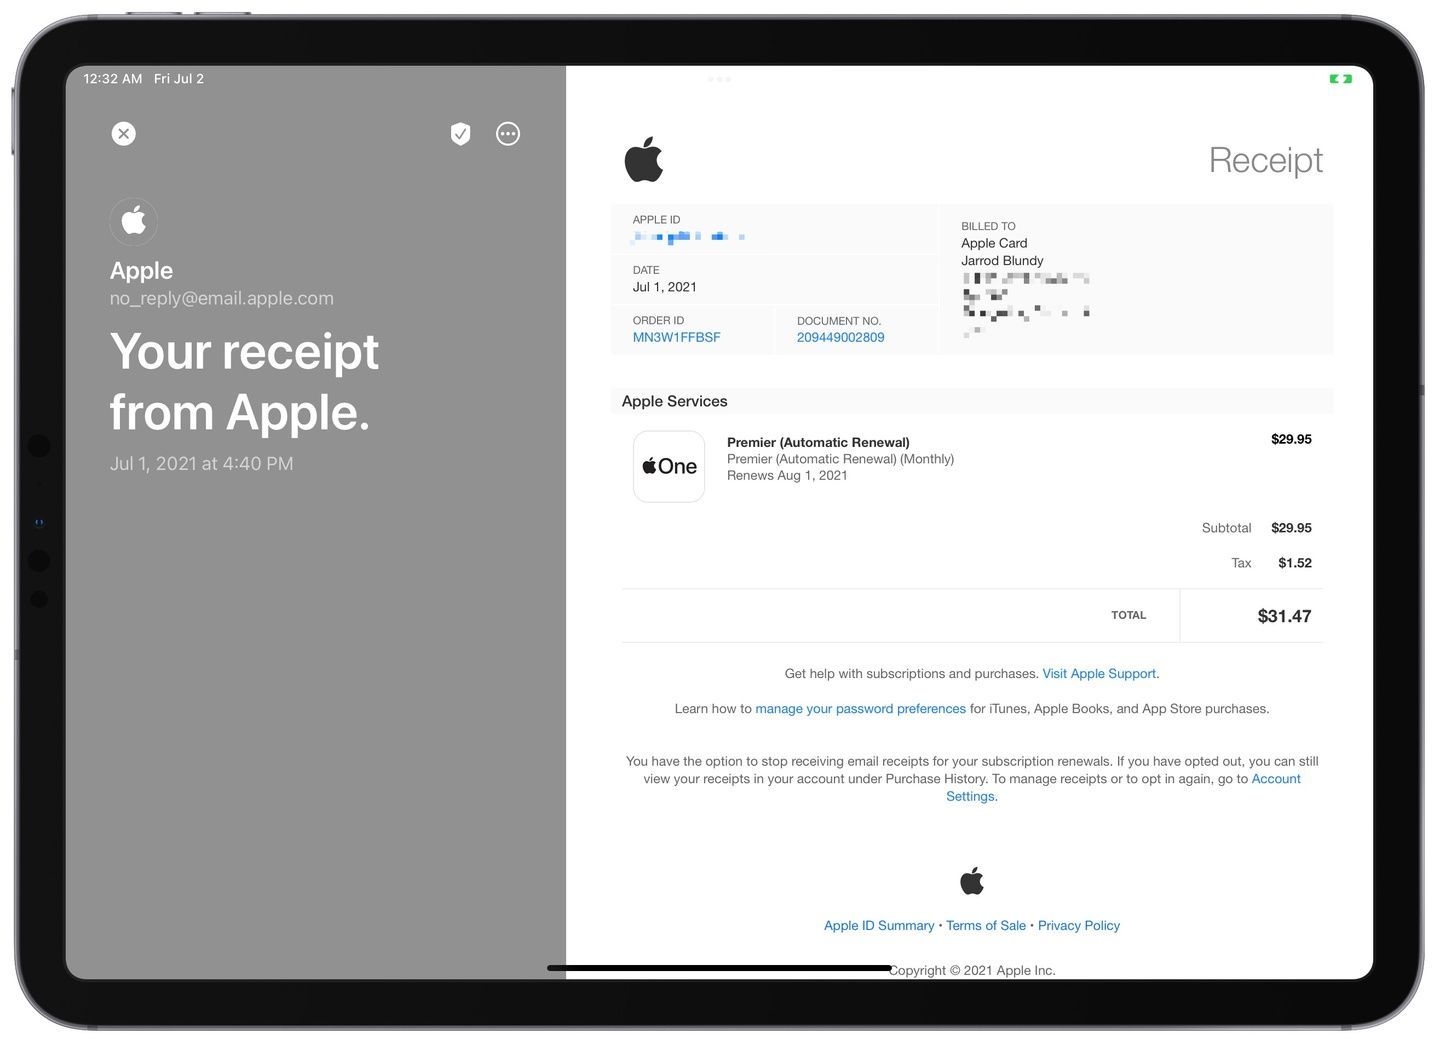 Big Mail showing an Apple receipt with clean formatting.